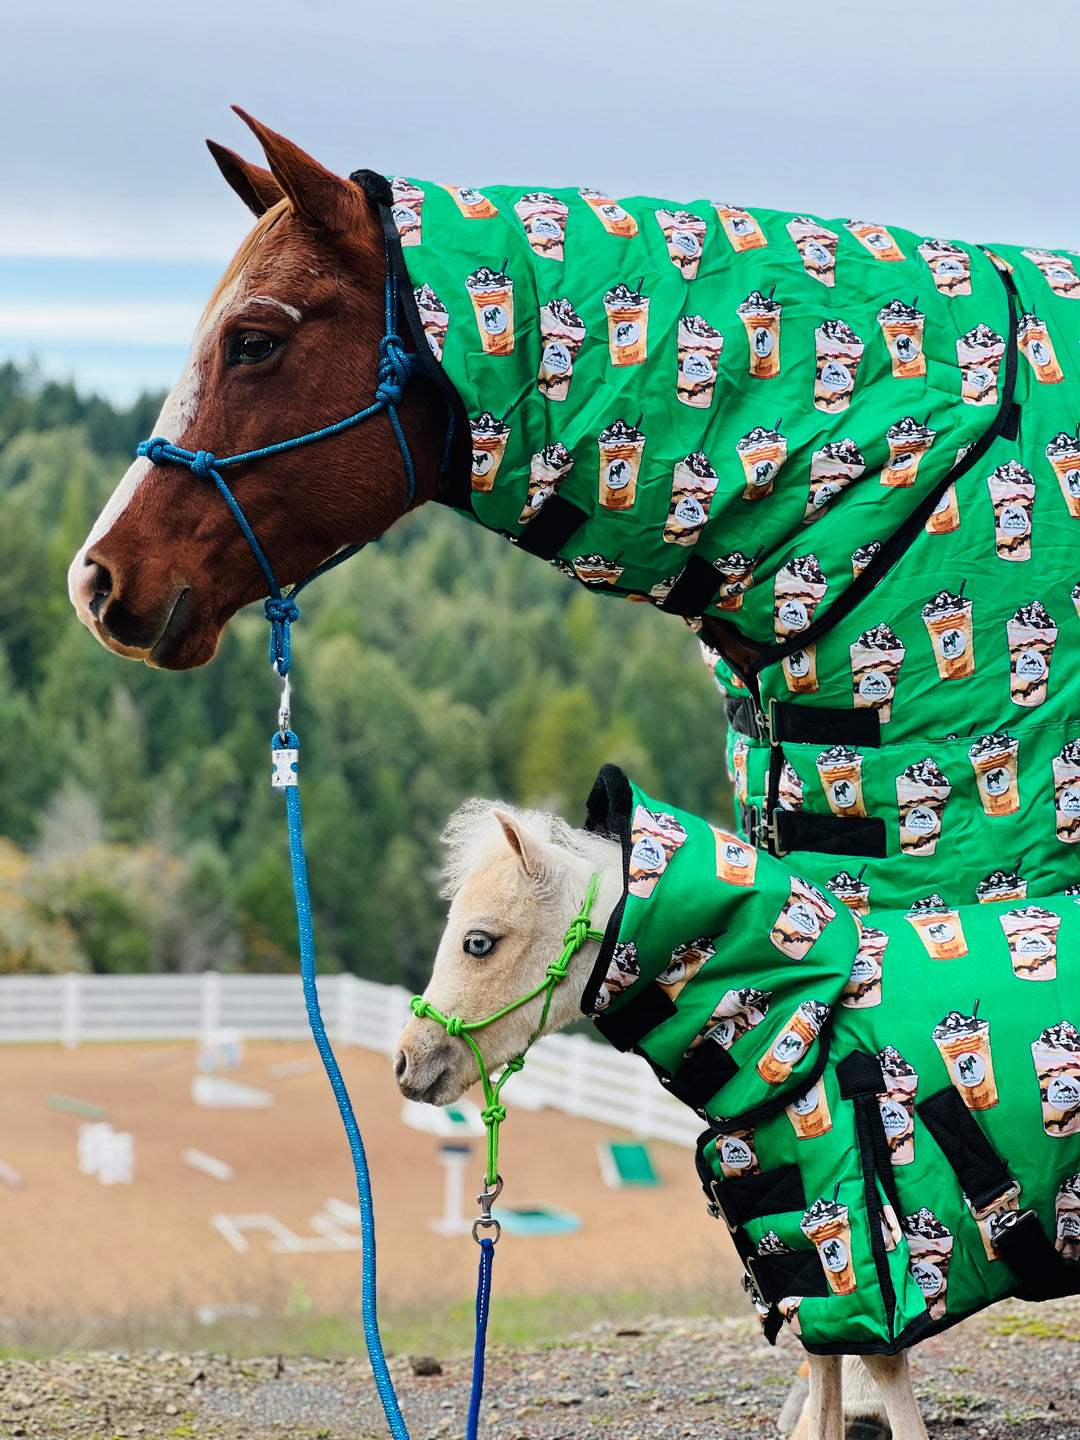 Star Point Horsemanship Rainbow Cheetah Pattern Miniature Horse Lycra Body  Suit at Tractor Supply Co.